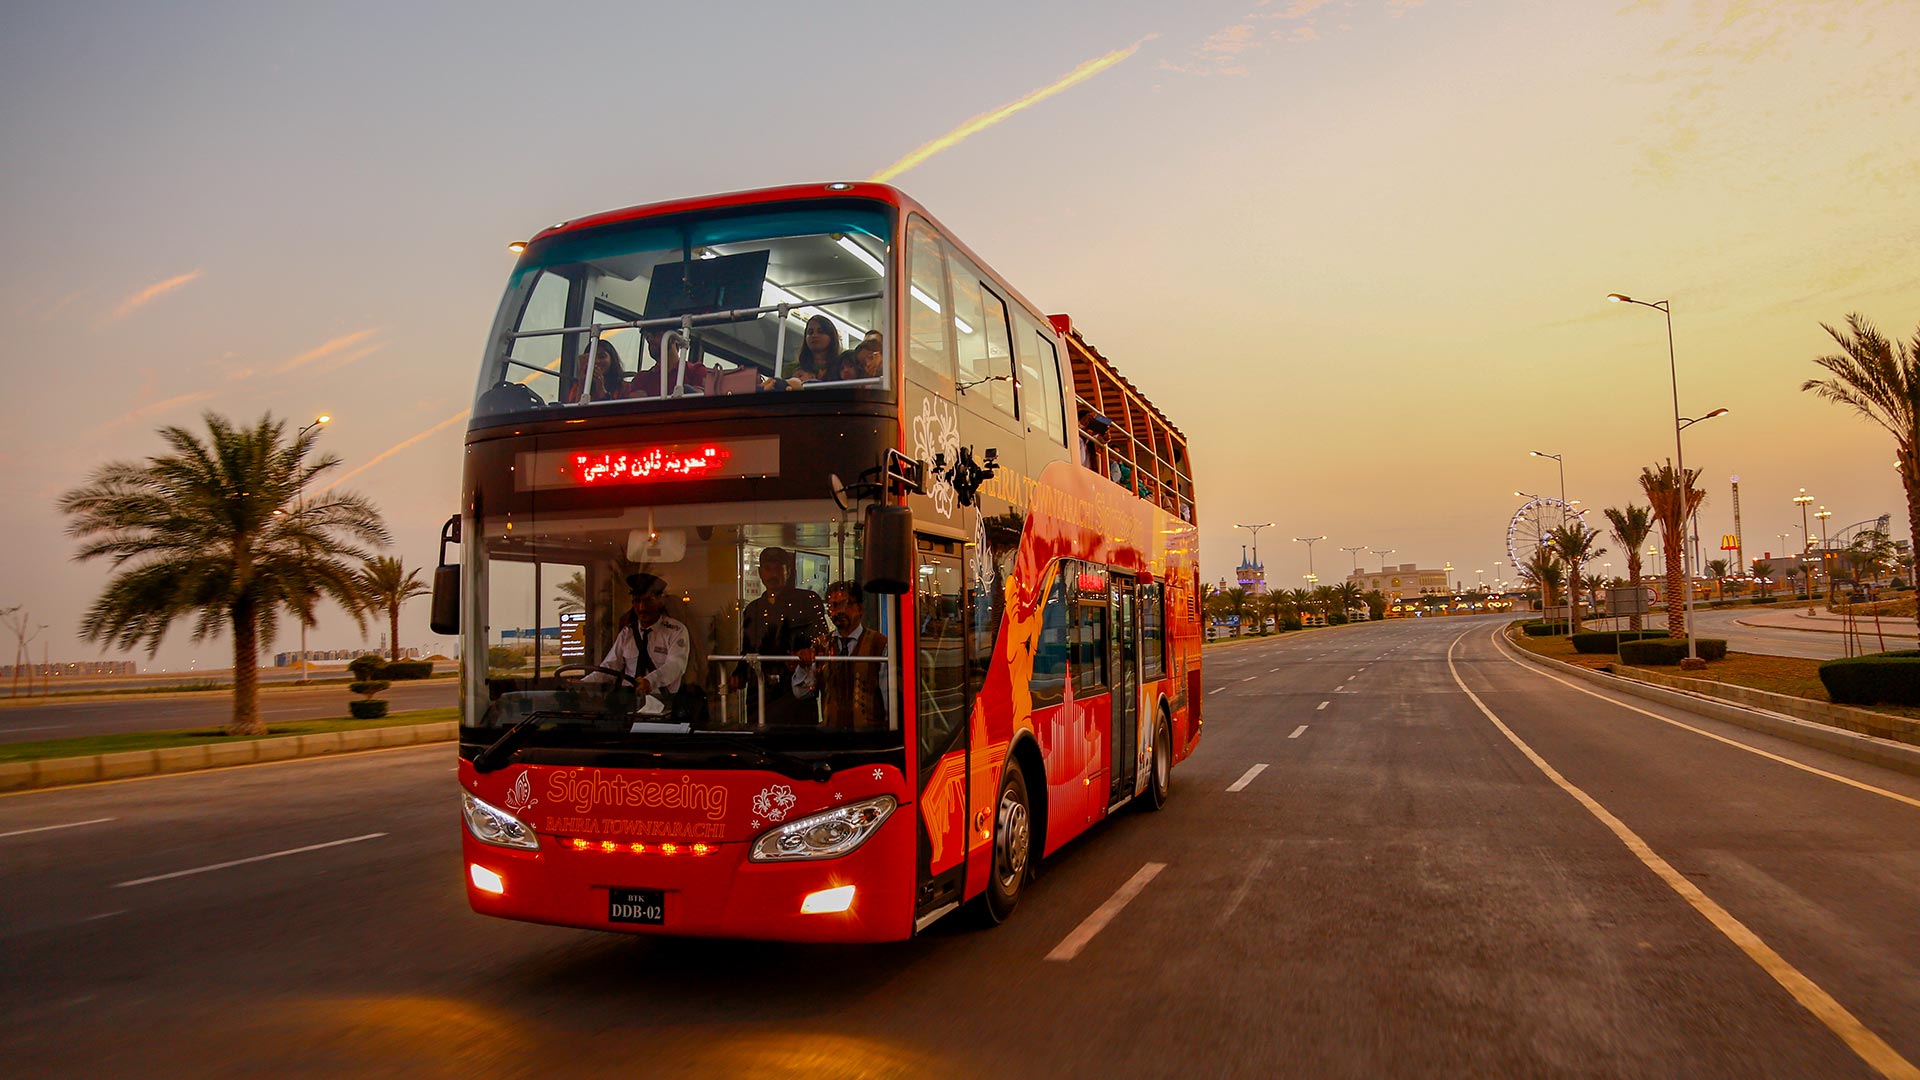 Explore the Beauty of Bahria Town Karachi with Sightseeing Bus